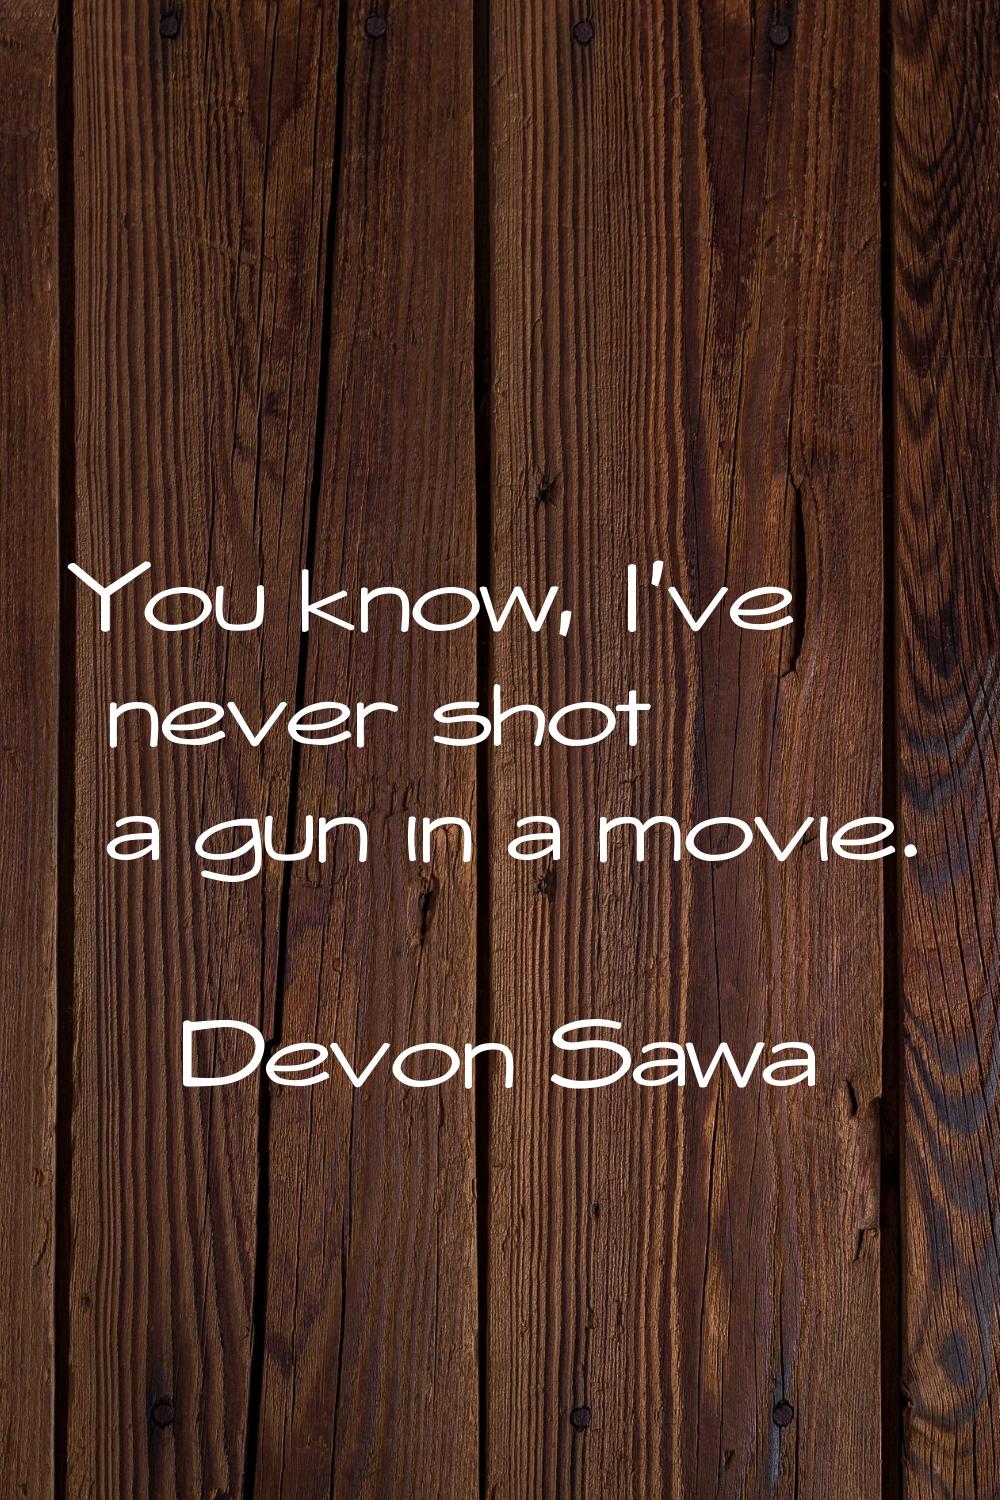 You know, I've never shot a gun in a movie.